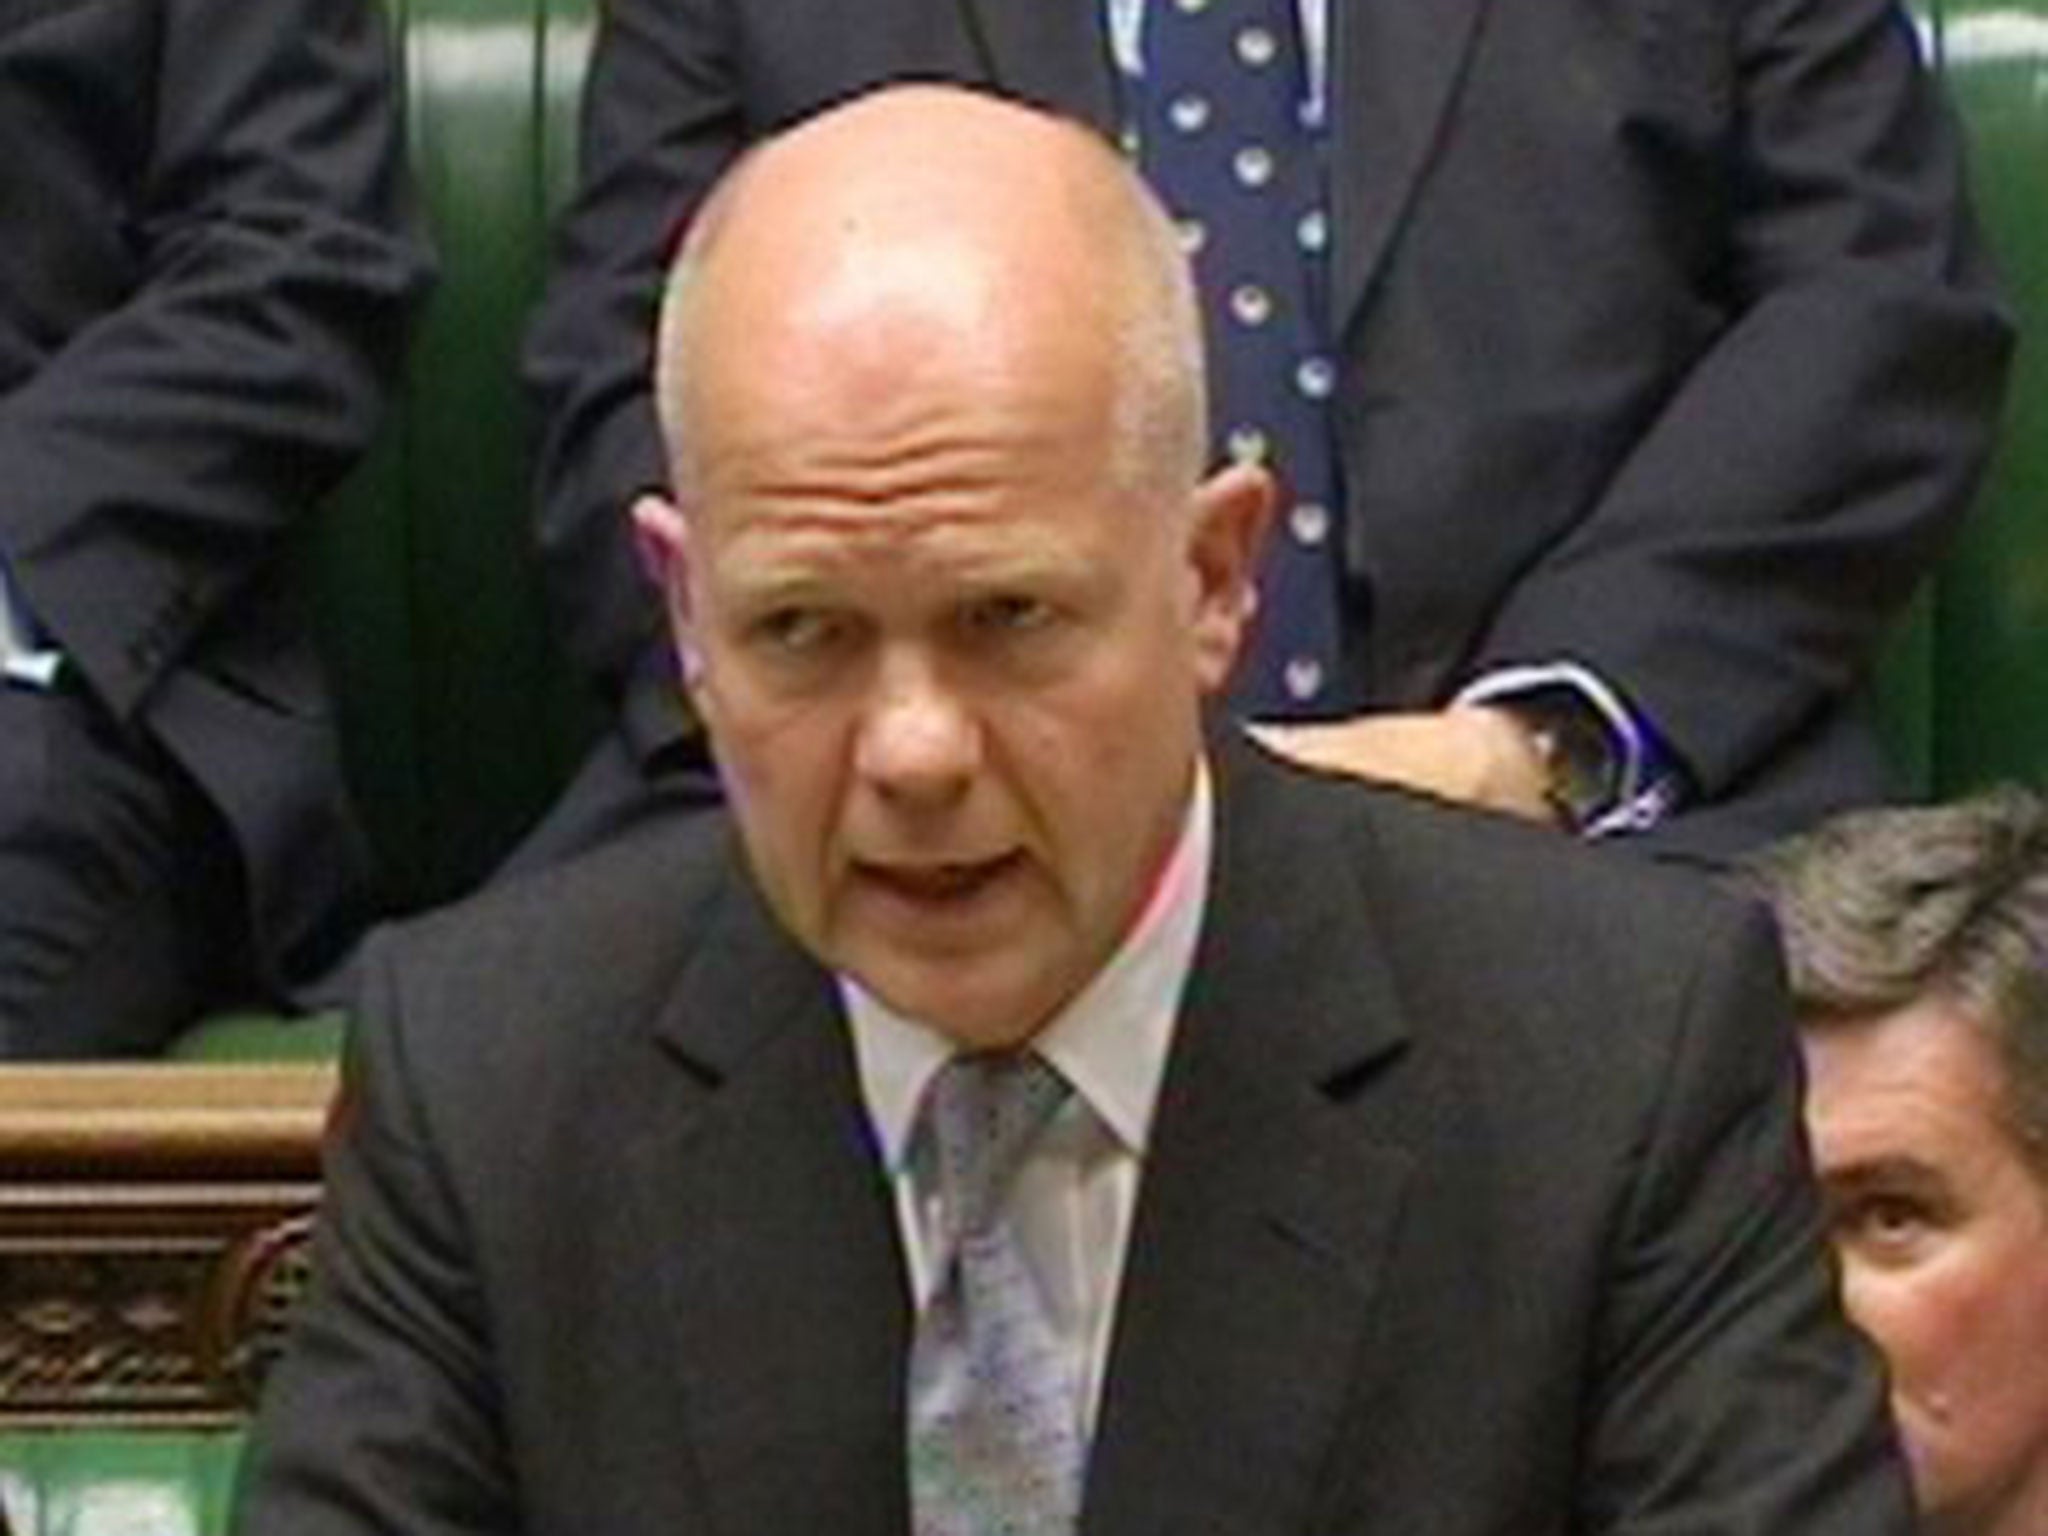 William Hague speaking in the House of Commons